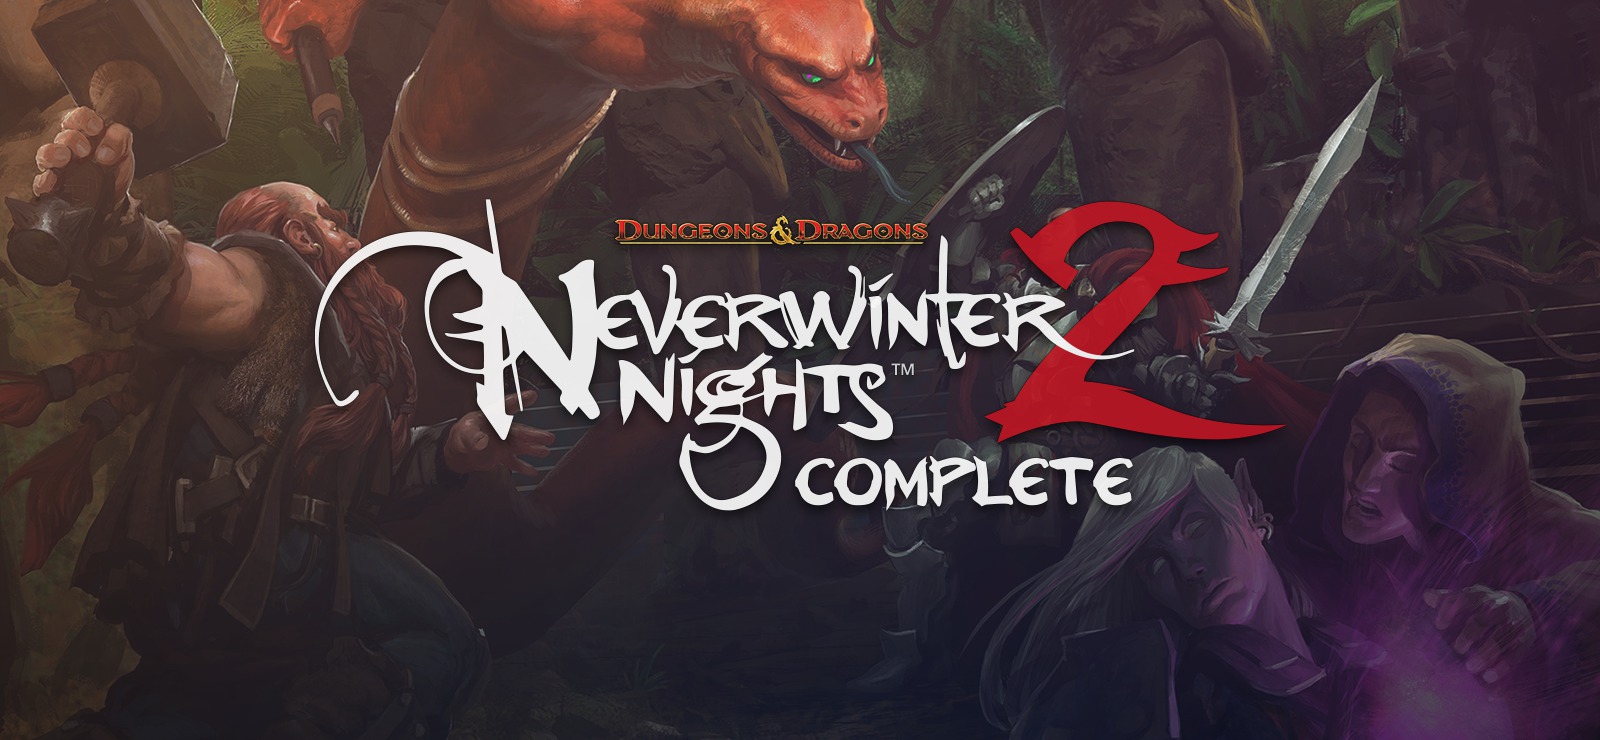 Neverwinter nights complete, poster